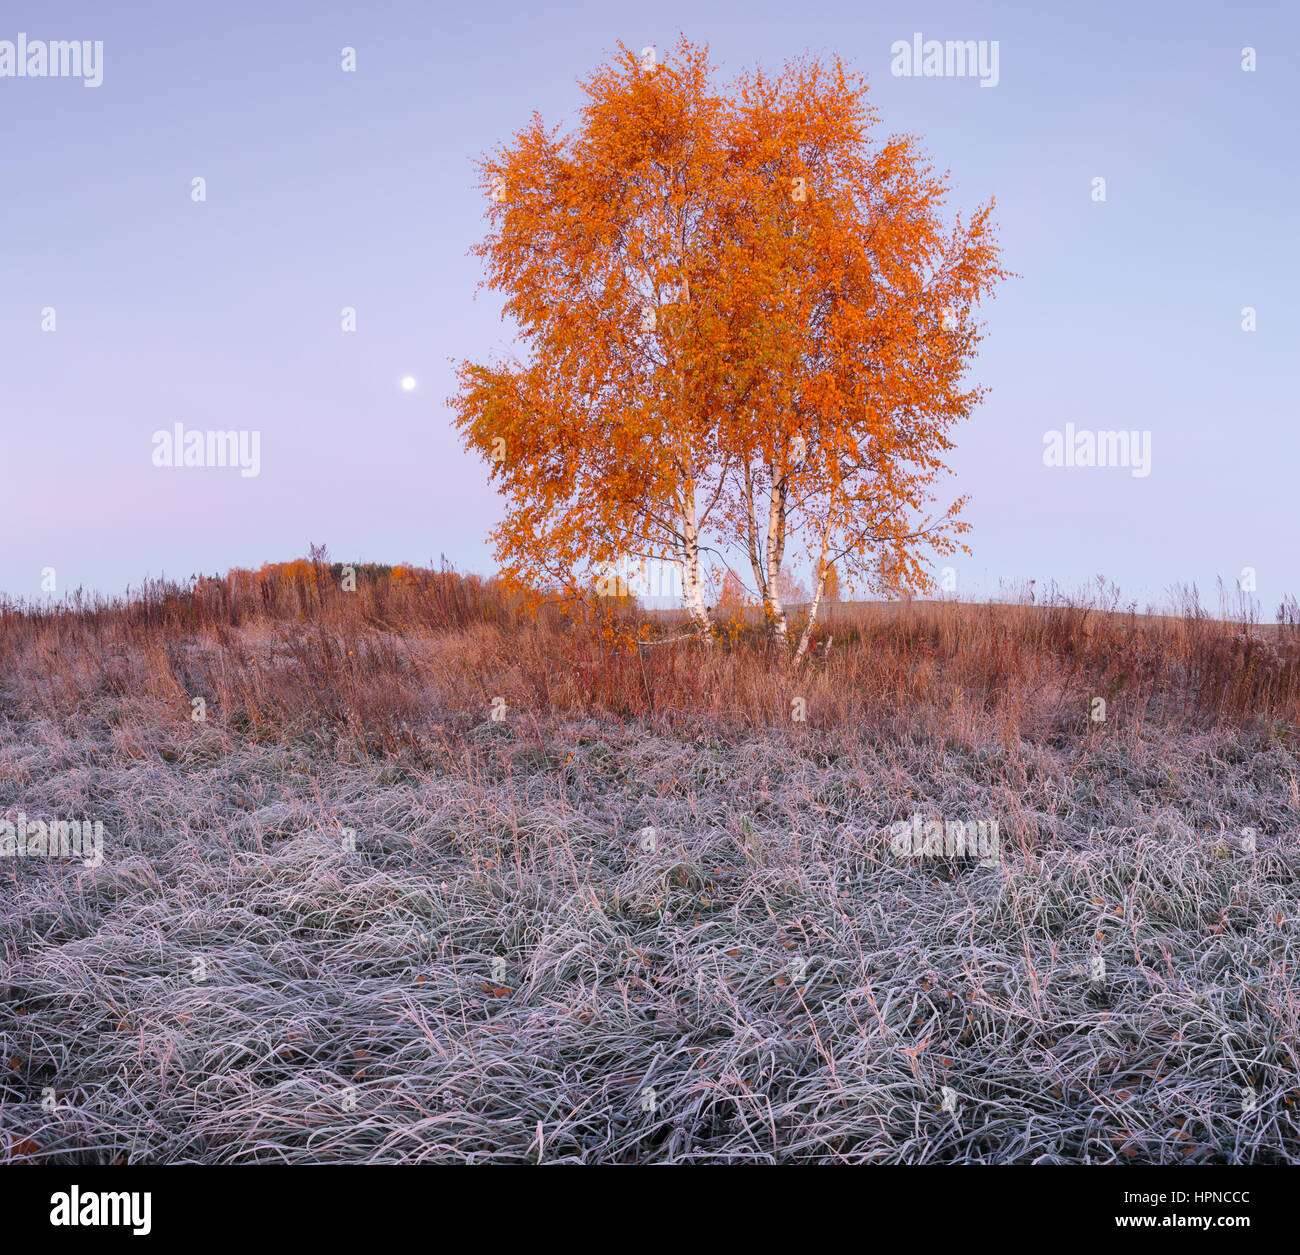 Birch tree with color leaves in the morning. Frosty autumn morning. Colorful autumn background. Stock Photo